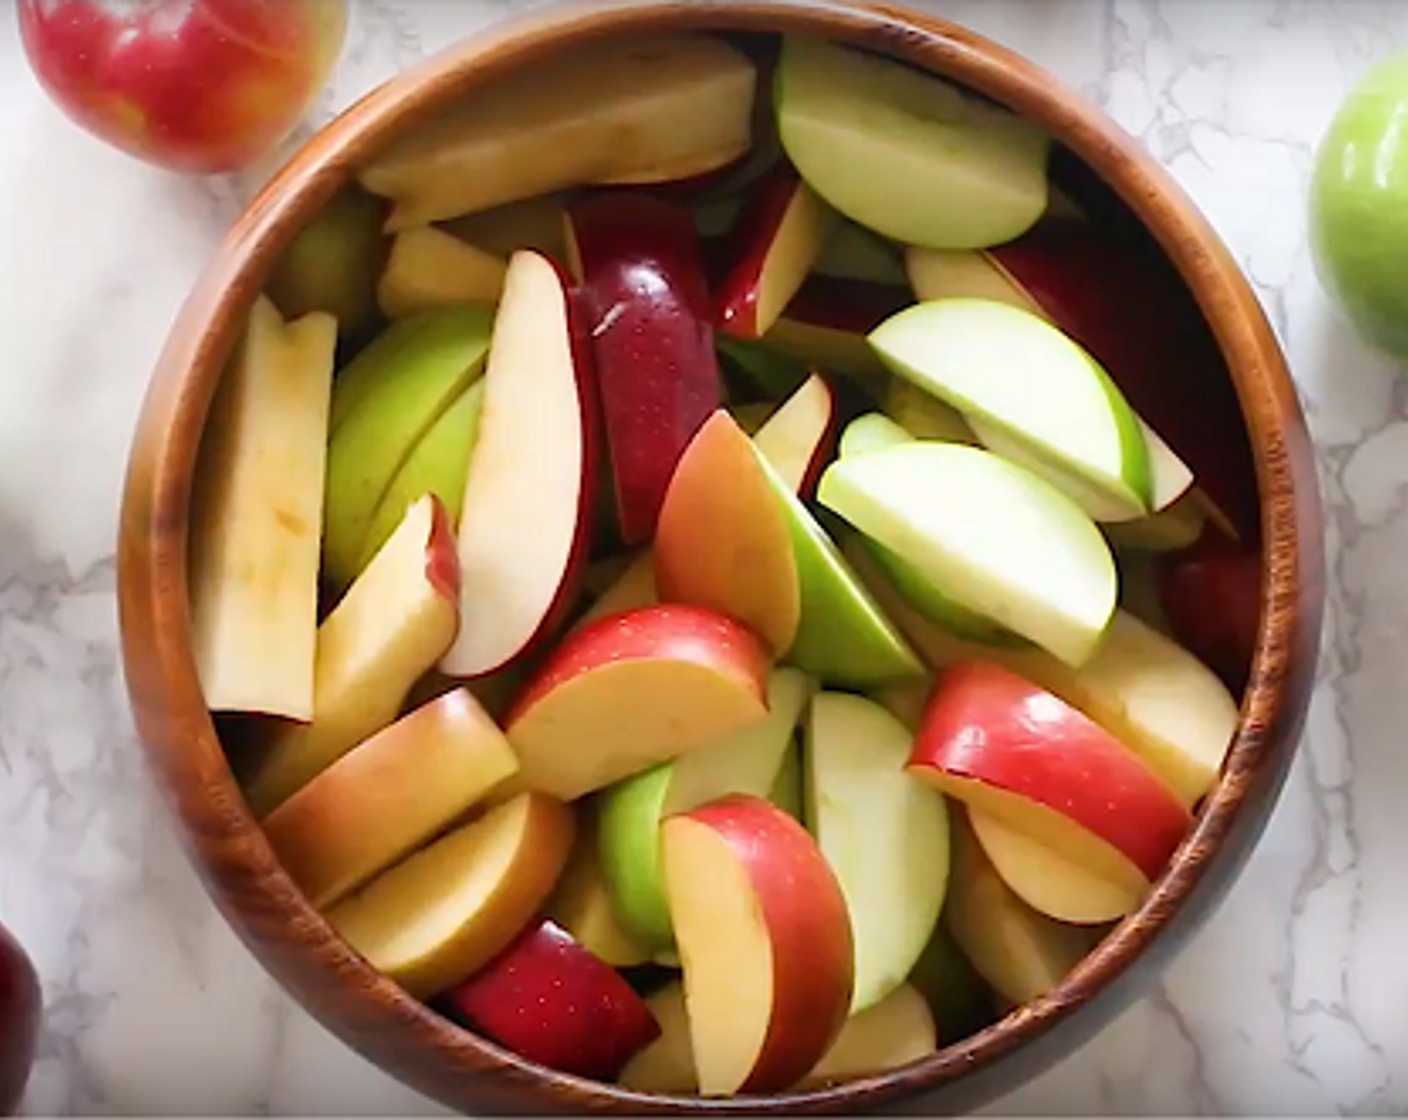 step 1 Slice your Apples (5 cups). Leave peel on. Place in a large bowl.